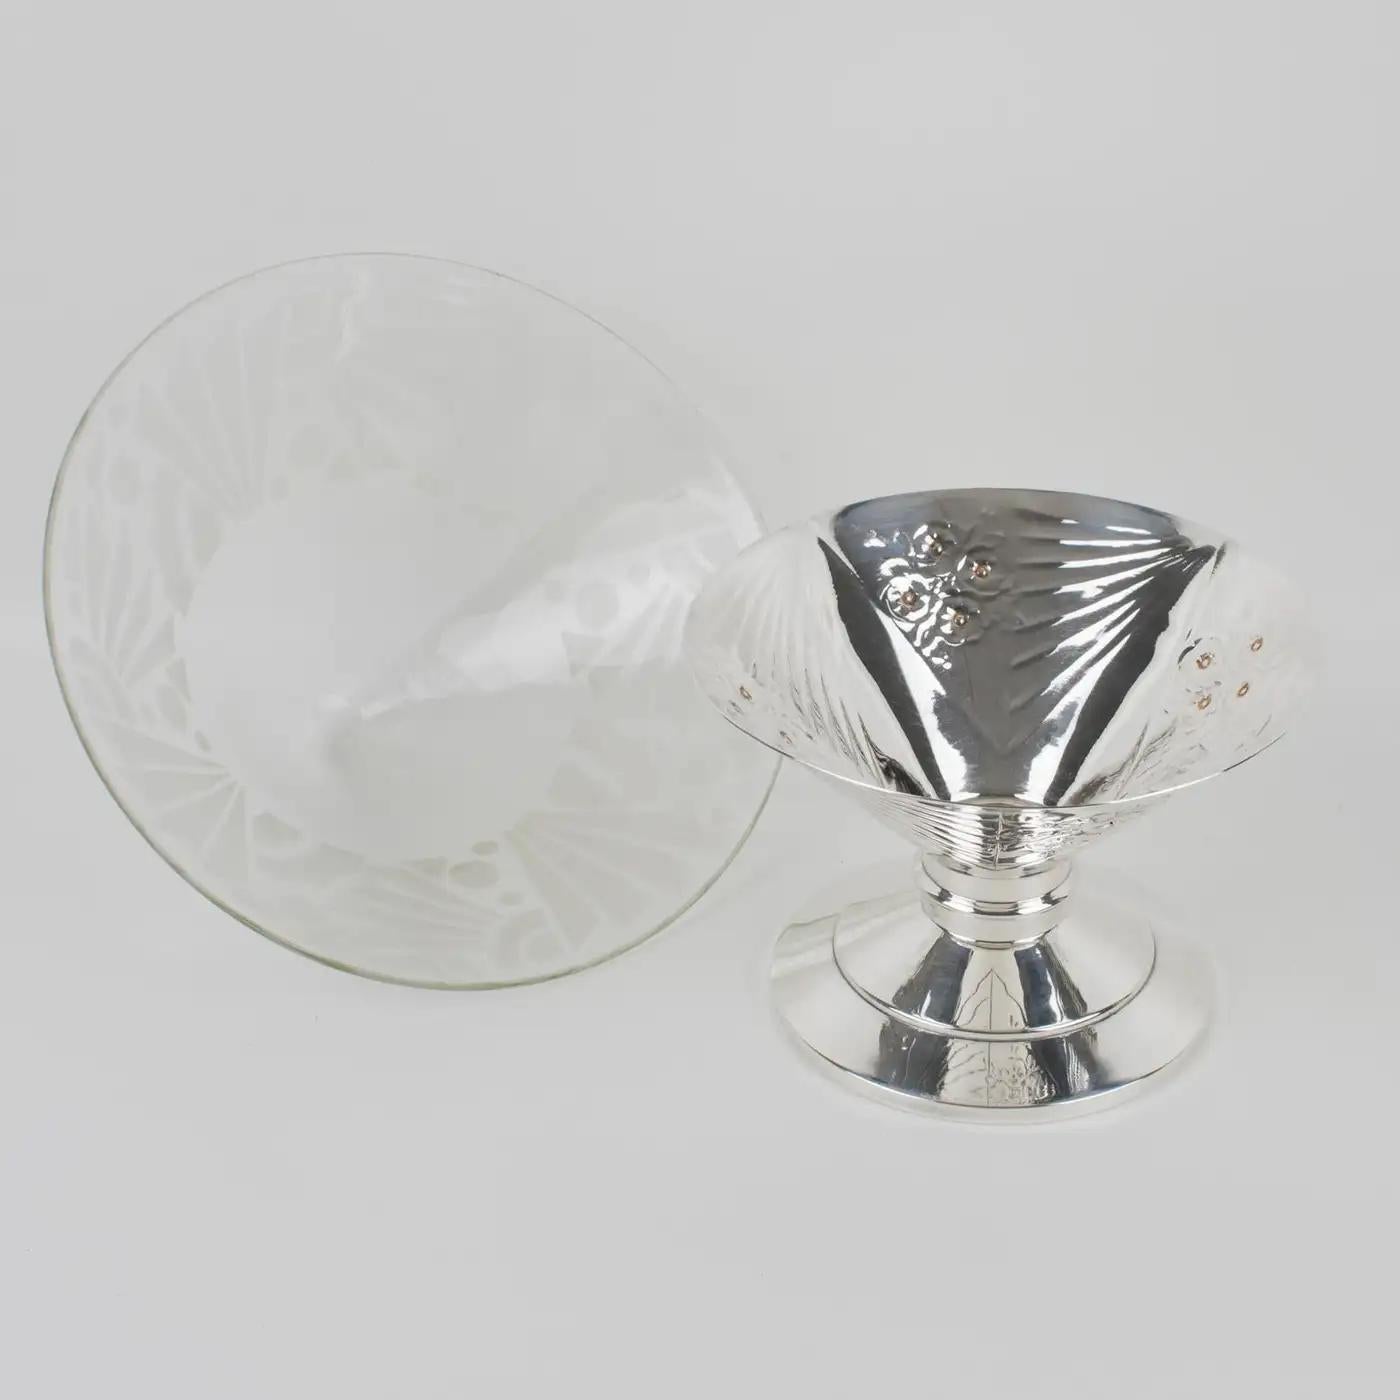 Art Deco Silver Plate and Etched Glass Centerpiece Bowl, 1930s For Sale 2